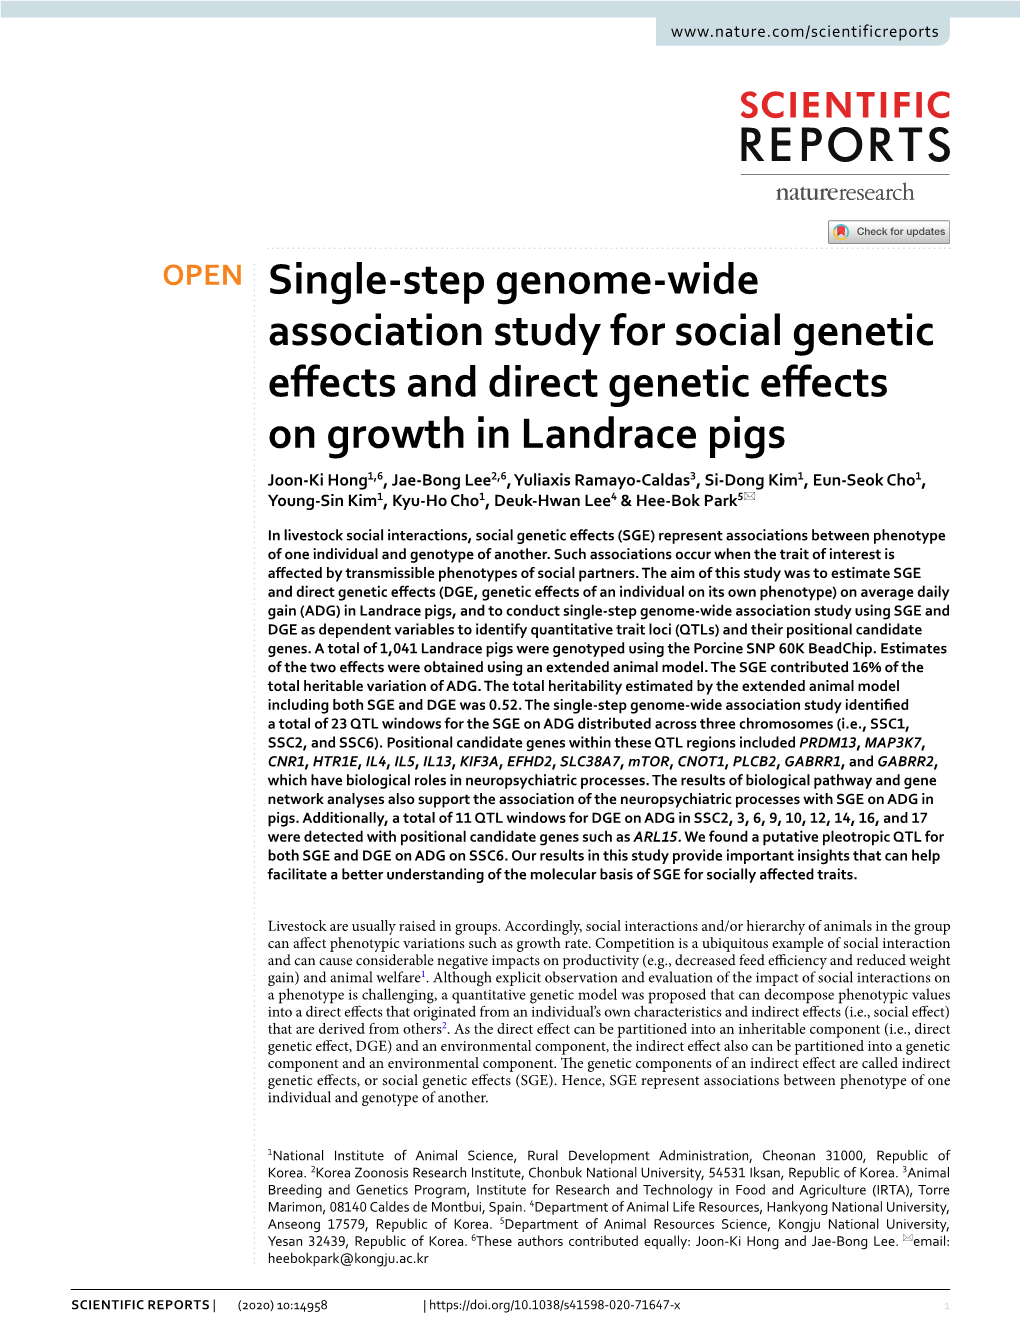 Single-Step Genome-Wide Association Study for Social Genetic Effects and Direct Genetic Effects on Growth in Landrace Pigs